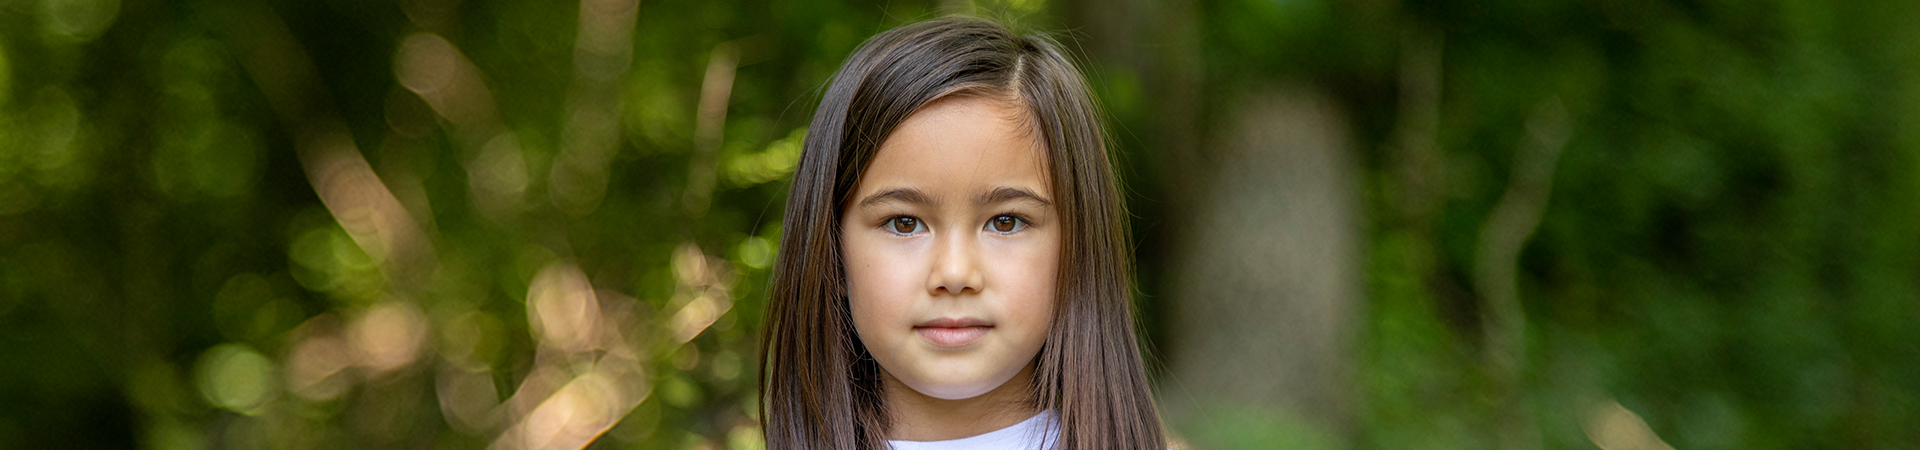  Young girl in natural background 